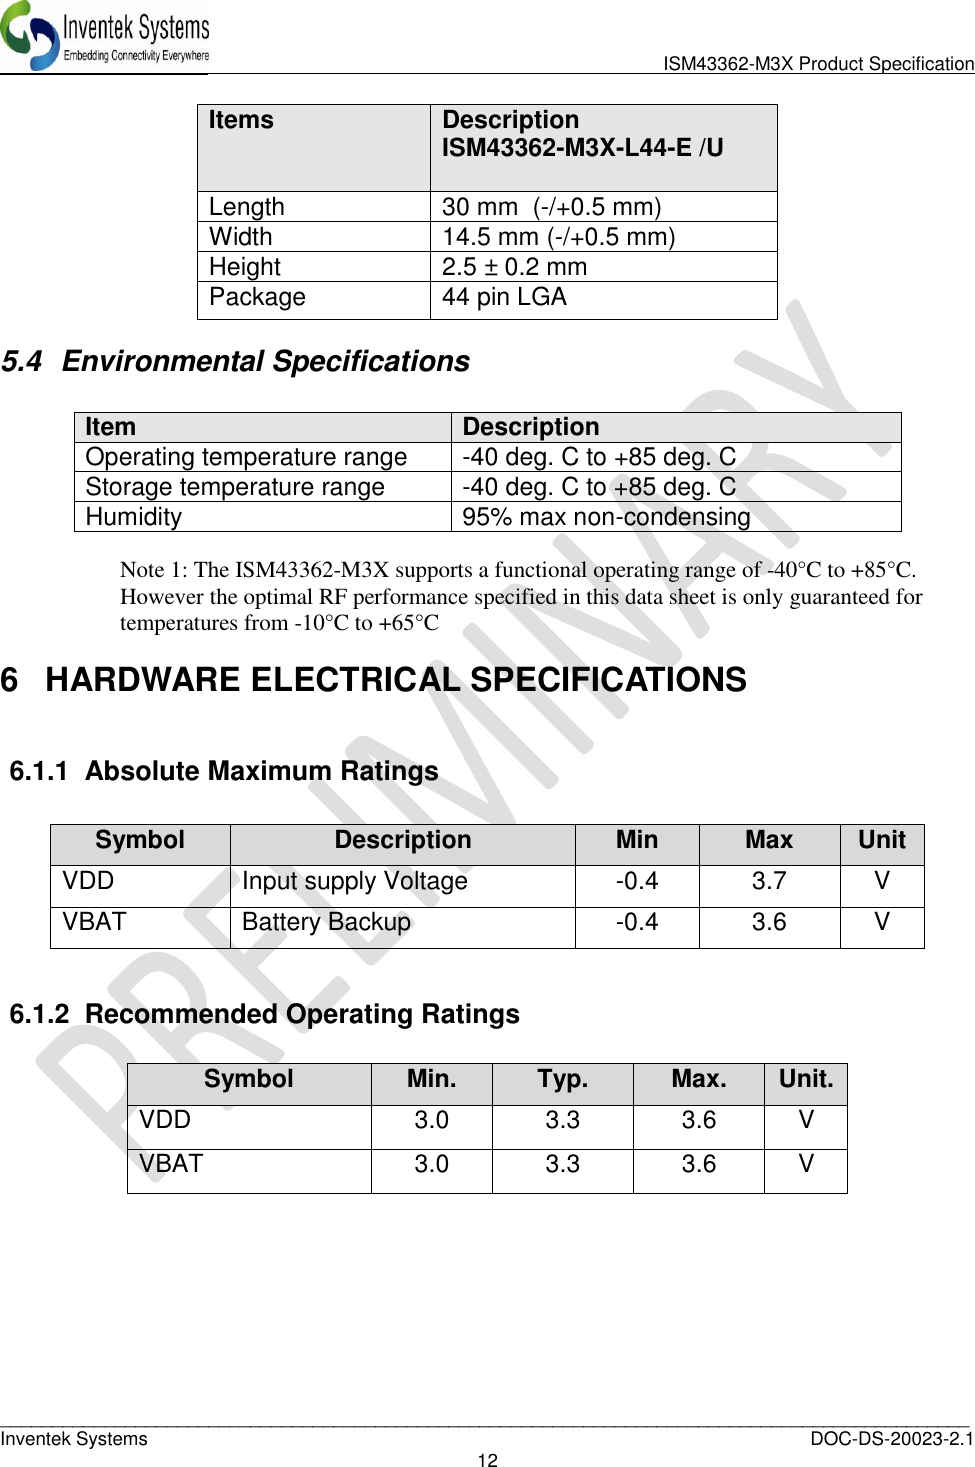                               ISM43362-M3X Product Specification _____________________________________________________________________________________________   Inventek Systems  DOC-DS-20023-2.1 12   Items Description ISM43362-M3X-L44-E /U  Length 30 mm  (-/+0.5 mm) Width 14.5 mm (-/+0.5 mm)  Height 2.5 ± 0.2 mm  Package 44 pin LGA 5.4  Environmental Specifications  Item Description Operating temperature range -40 deg. C to +85 deg. C Storage temperature range -40 deg. C to +85 deg. C Humidity 95% max non-condensing  Note 1: The ISM43362-M3X supports a functional operating range of -40°C to +85°C. However the optimal RF performance specified in this data sheet is only guaranteed for temperatures from -10°C to +65°C  6  HARDWARE ELECTRICAL SPECIFICATIONS  6.1.1  Absolute Maximum Ratings   6.1.2  Recommended Operating Ratings  Symbol Min. Typ. Max. Unit. VDD 3.0 3.3 3.6 V VBAT 3.0 3.3 3.6 V      Symbol Description Min Max Unit VDD Input supply Voltage -0.4 3.7 V VBAT Battery Backup -0.4 3.6 V 